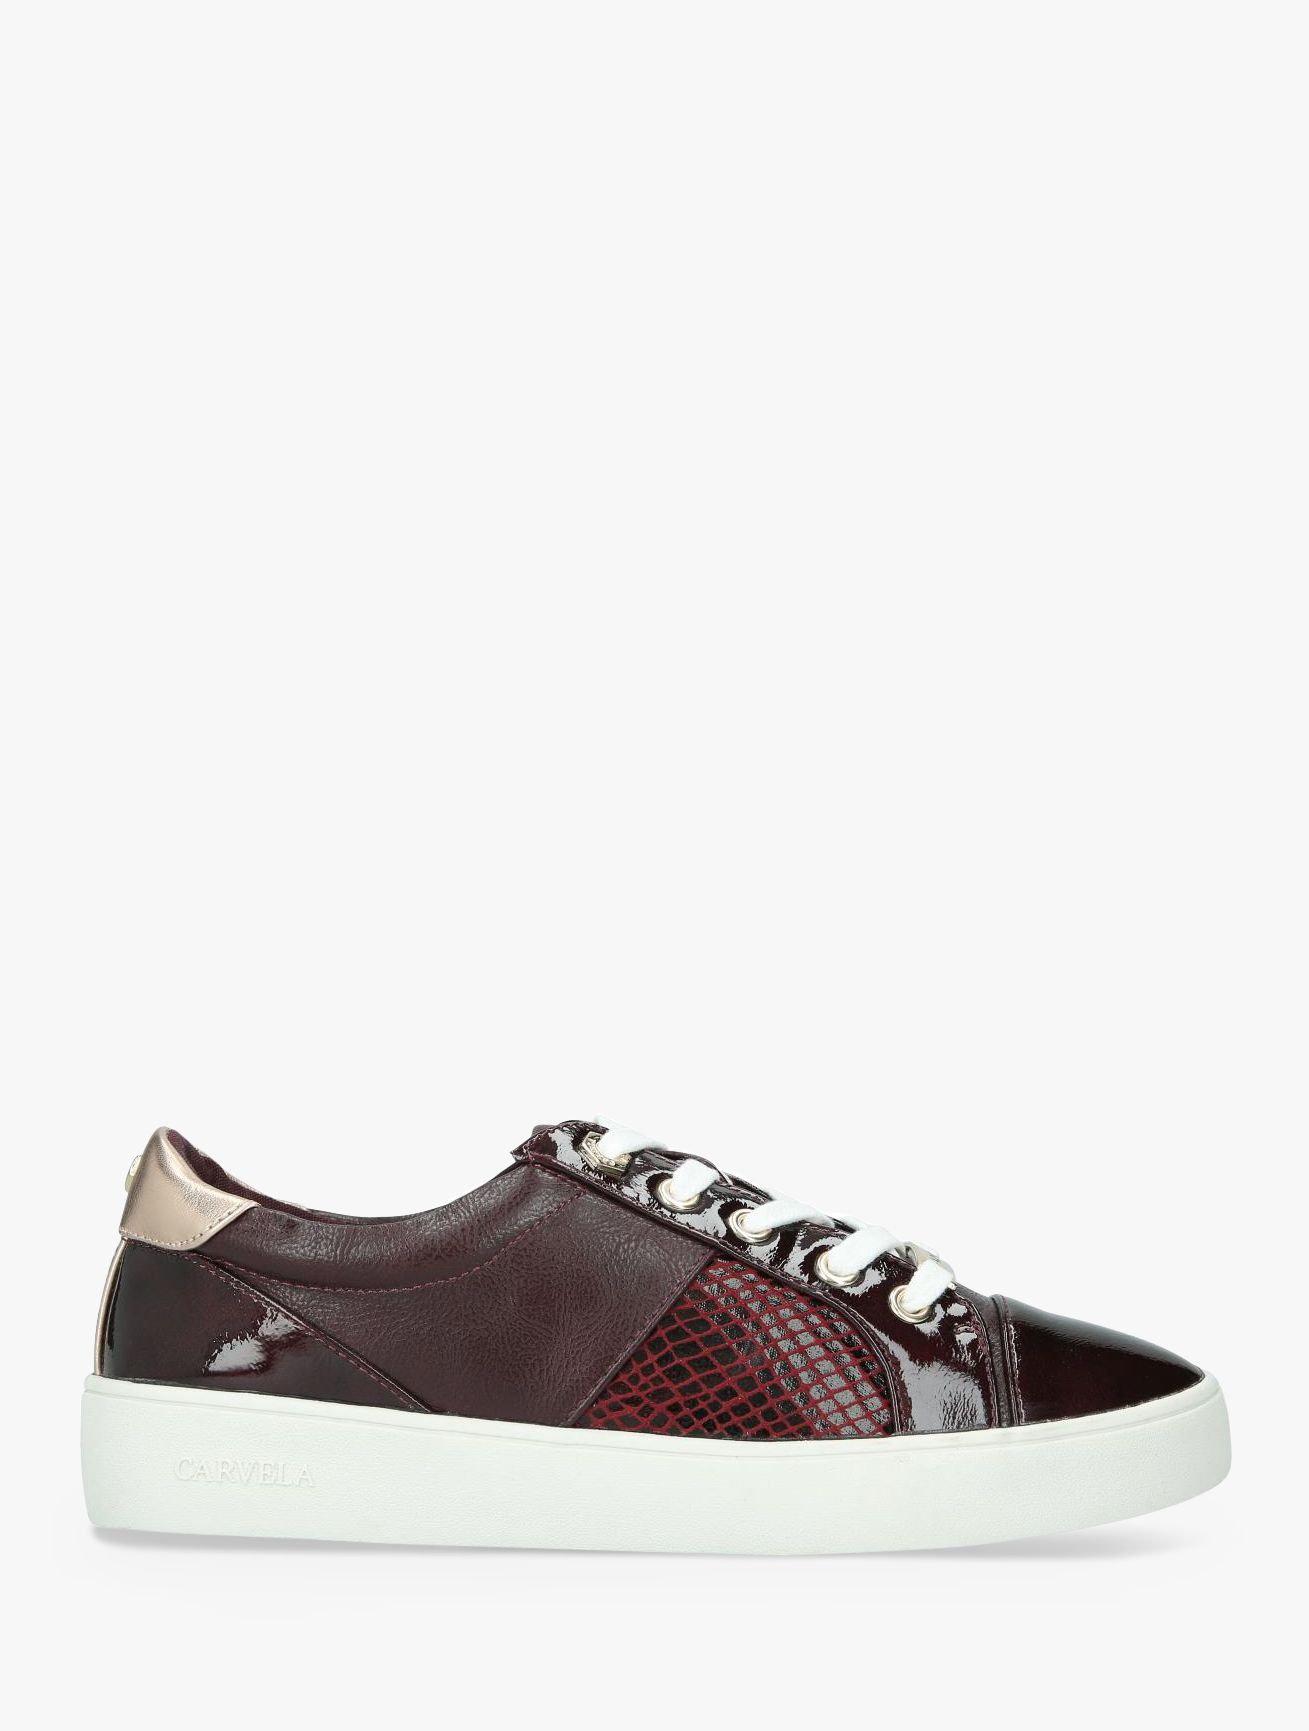 Carvela Jagger Trainers, Red